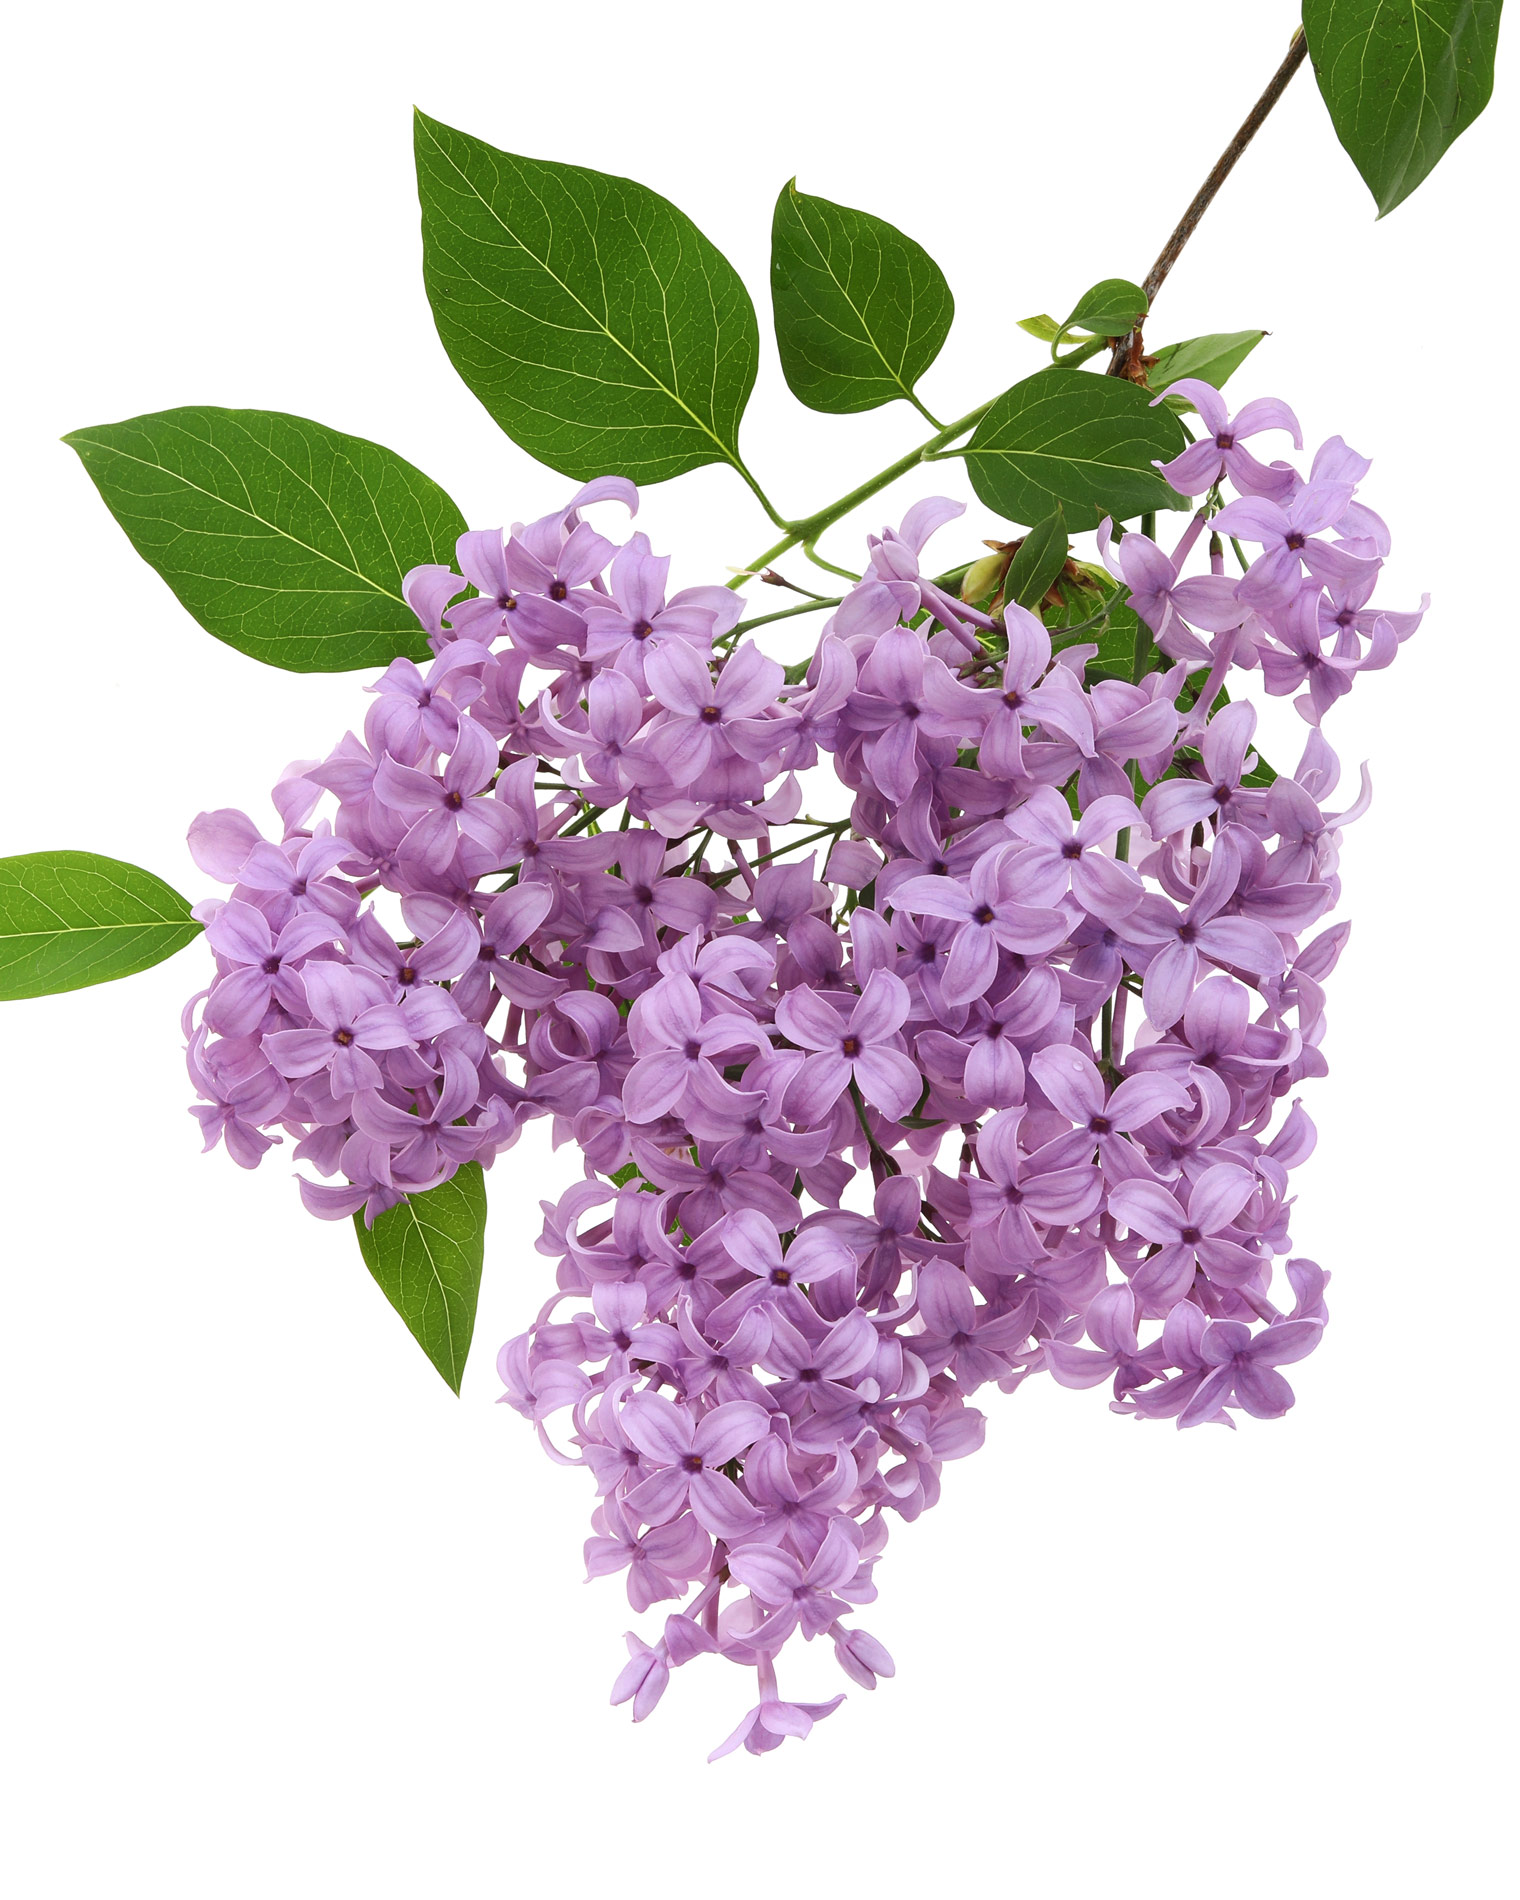 whew! back in time for lilacs